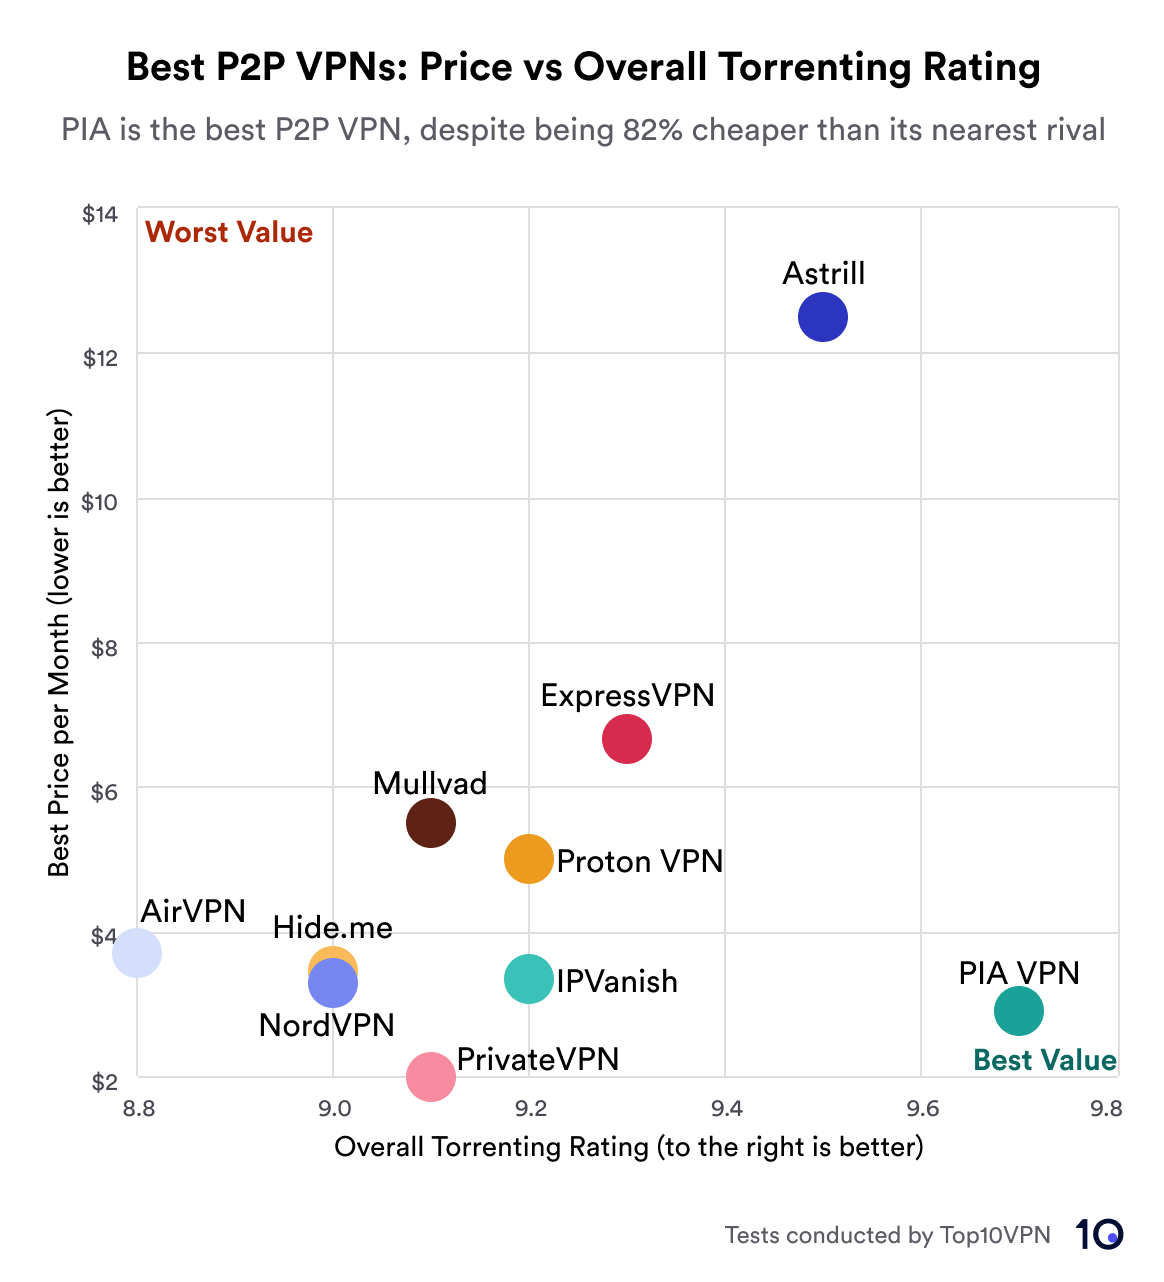 Scatter plot comparing the best torrenting VPNs by price and performance